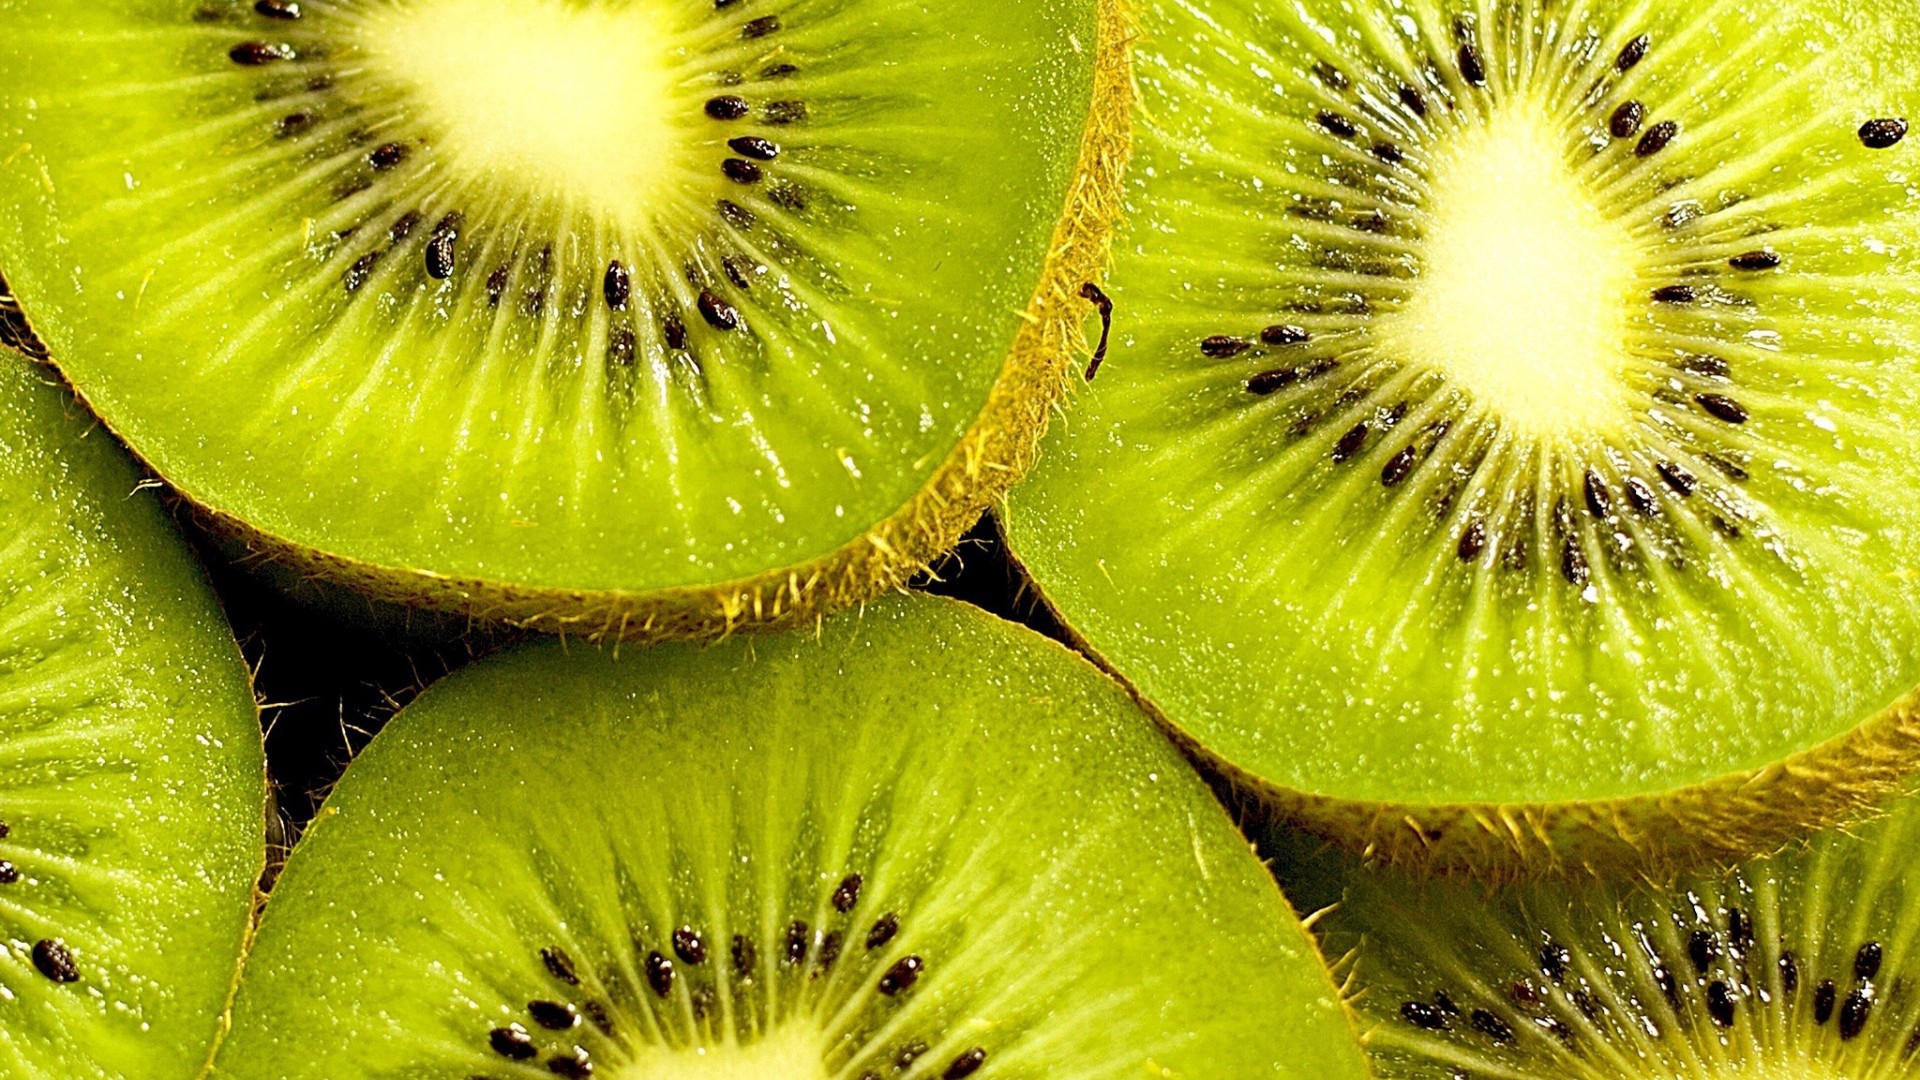 Juicy Kiwi Wallpaper And Image Pictures Photos